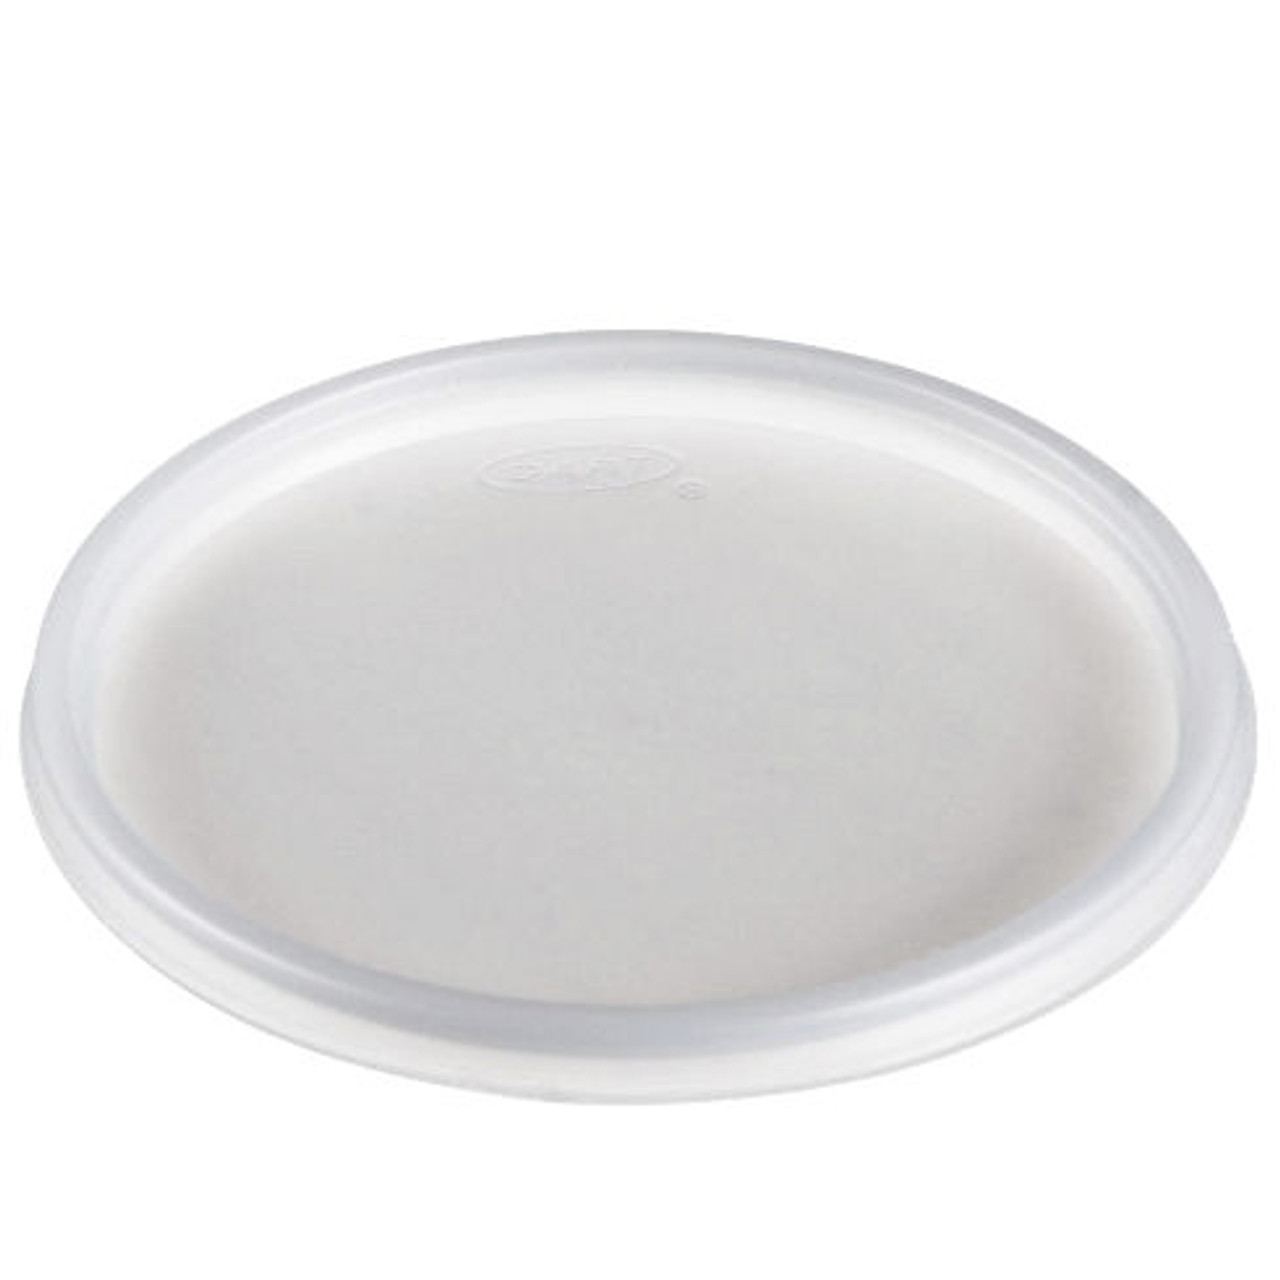 500 - Lids 16oz ( for polystyrene containers )